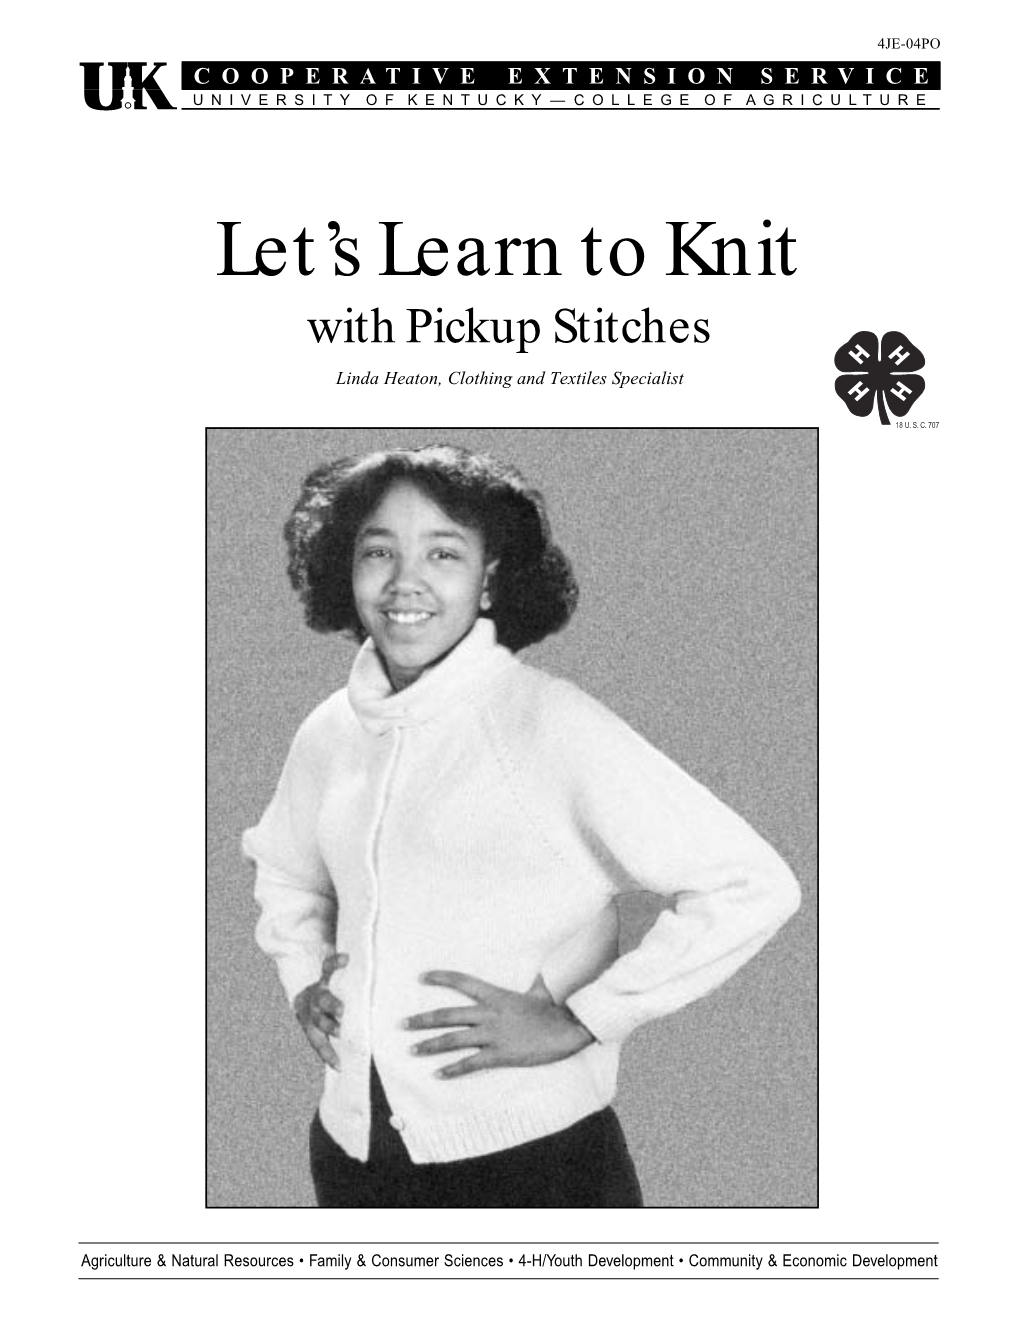 4JE-04PO: Let's Learn to Knit with Pickup Stitches